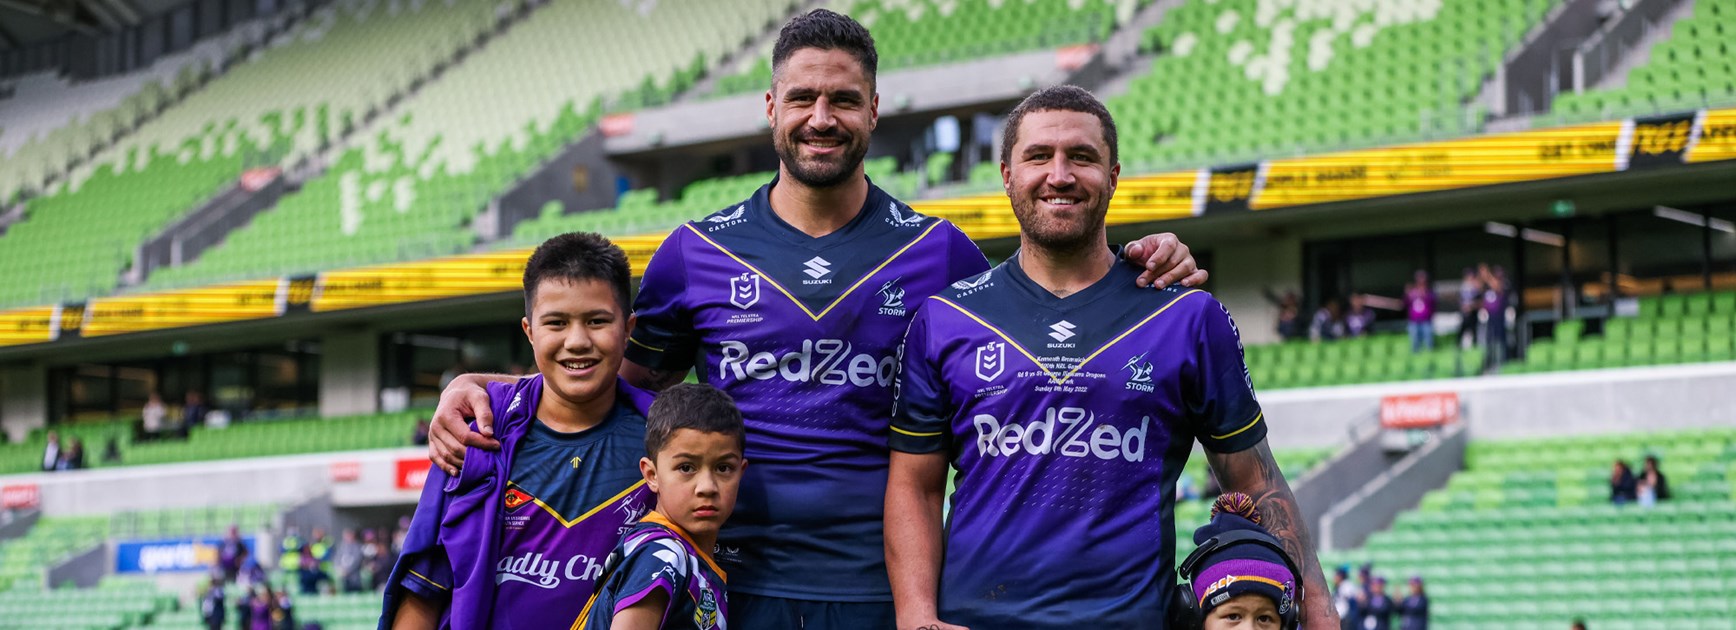 Future Dolphins to set amazing NRL playing record